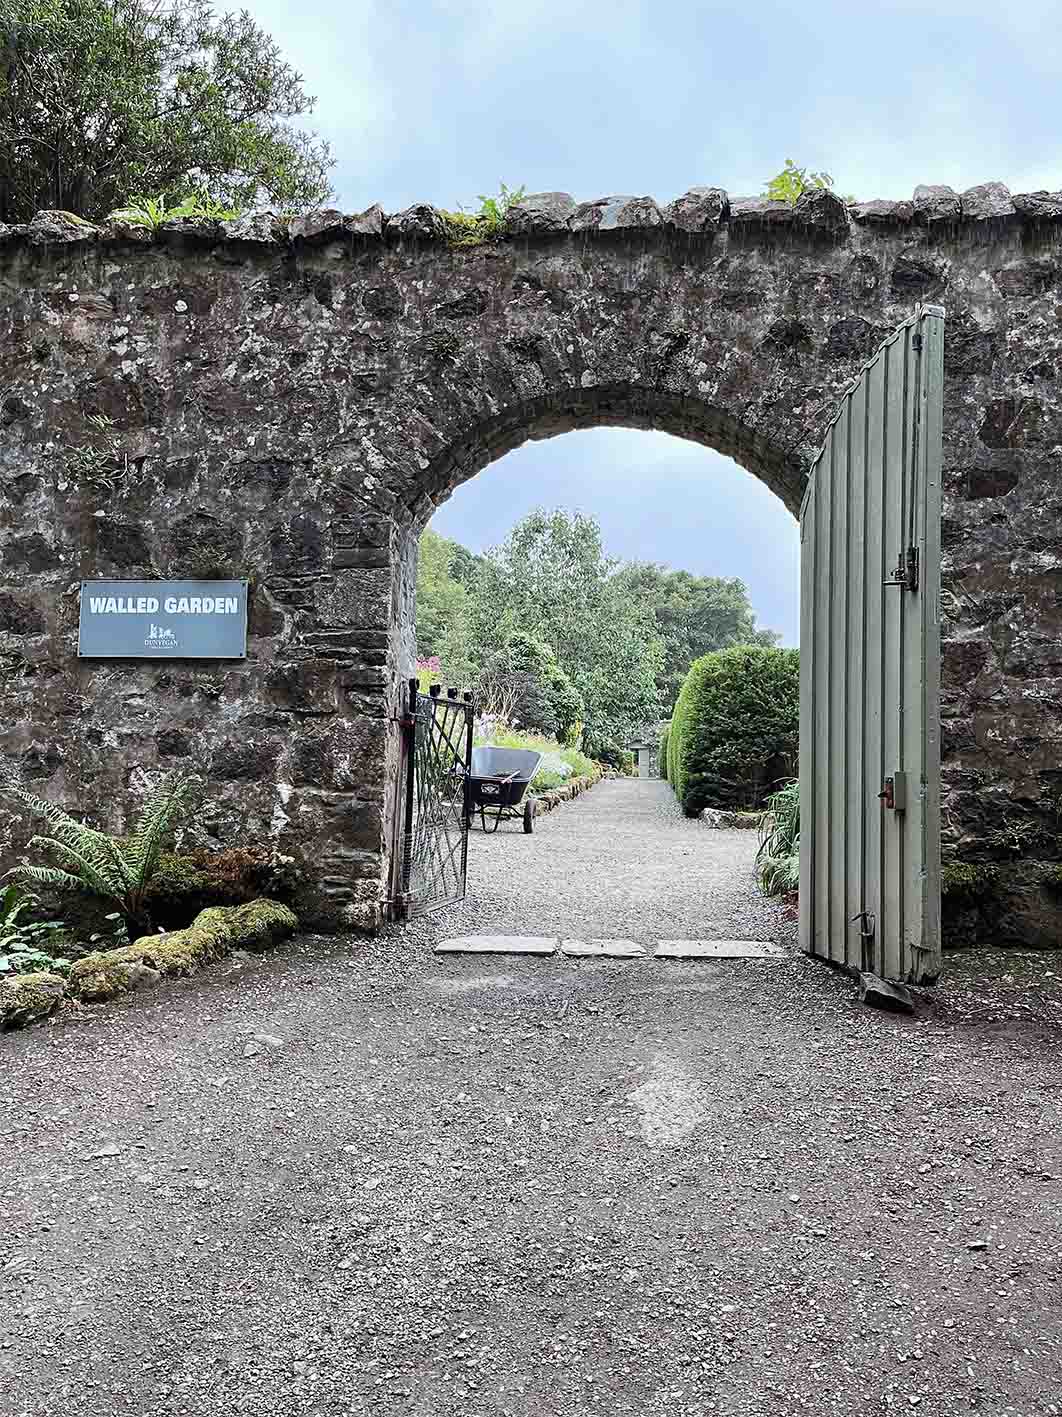 The walled garden at Dunvegan Castle